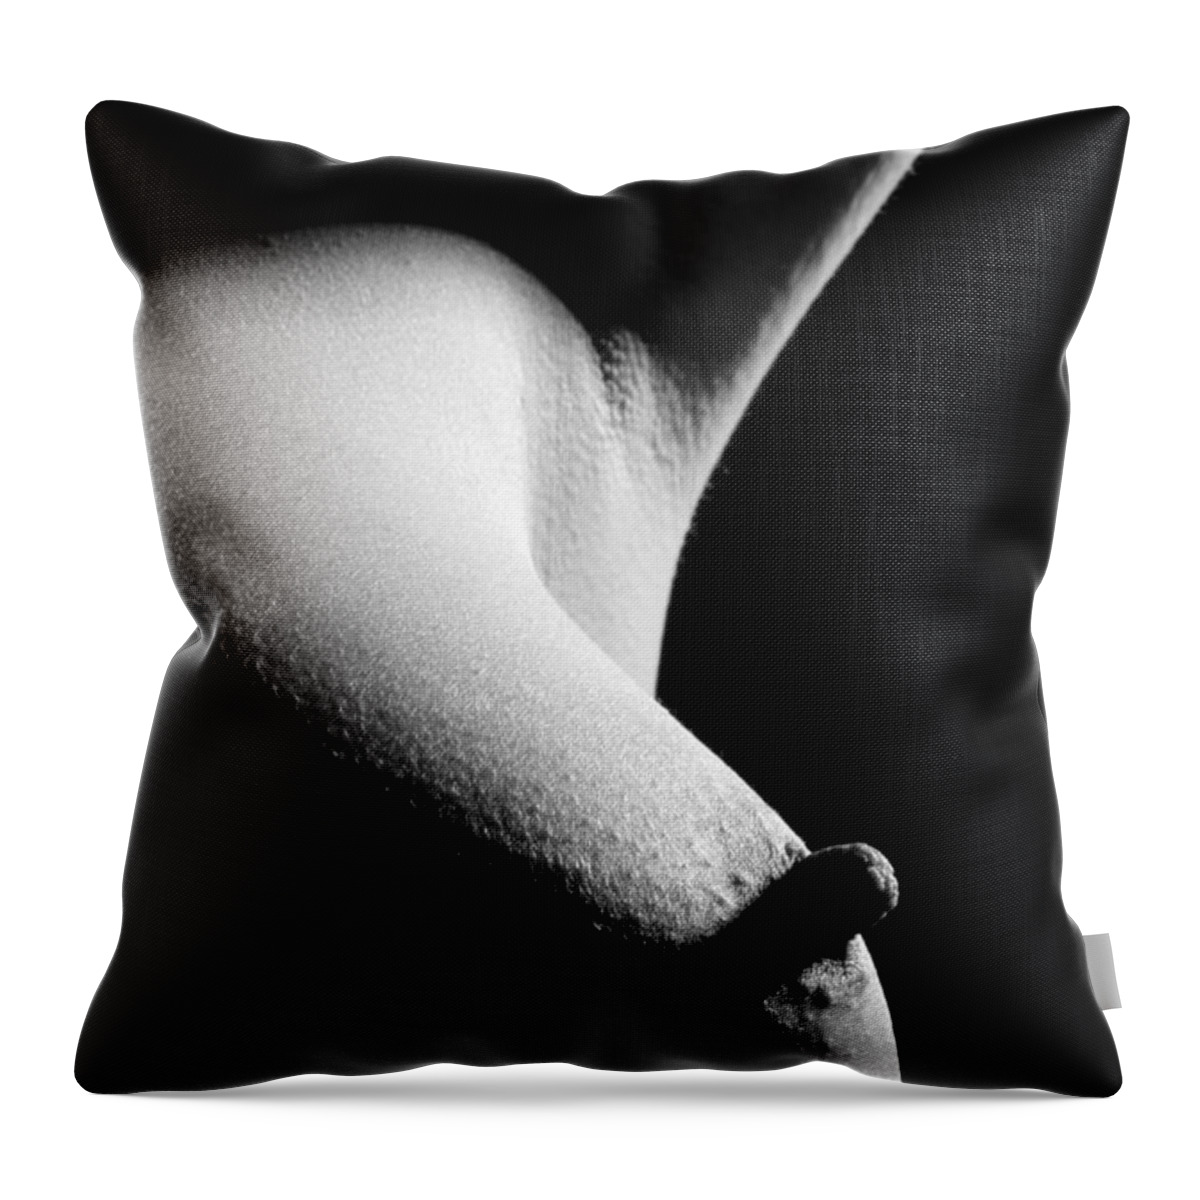 Nude Throw Pillow featuring the photograph Perfection by Joe Kozlowski